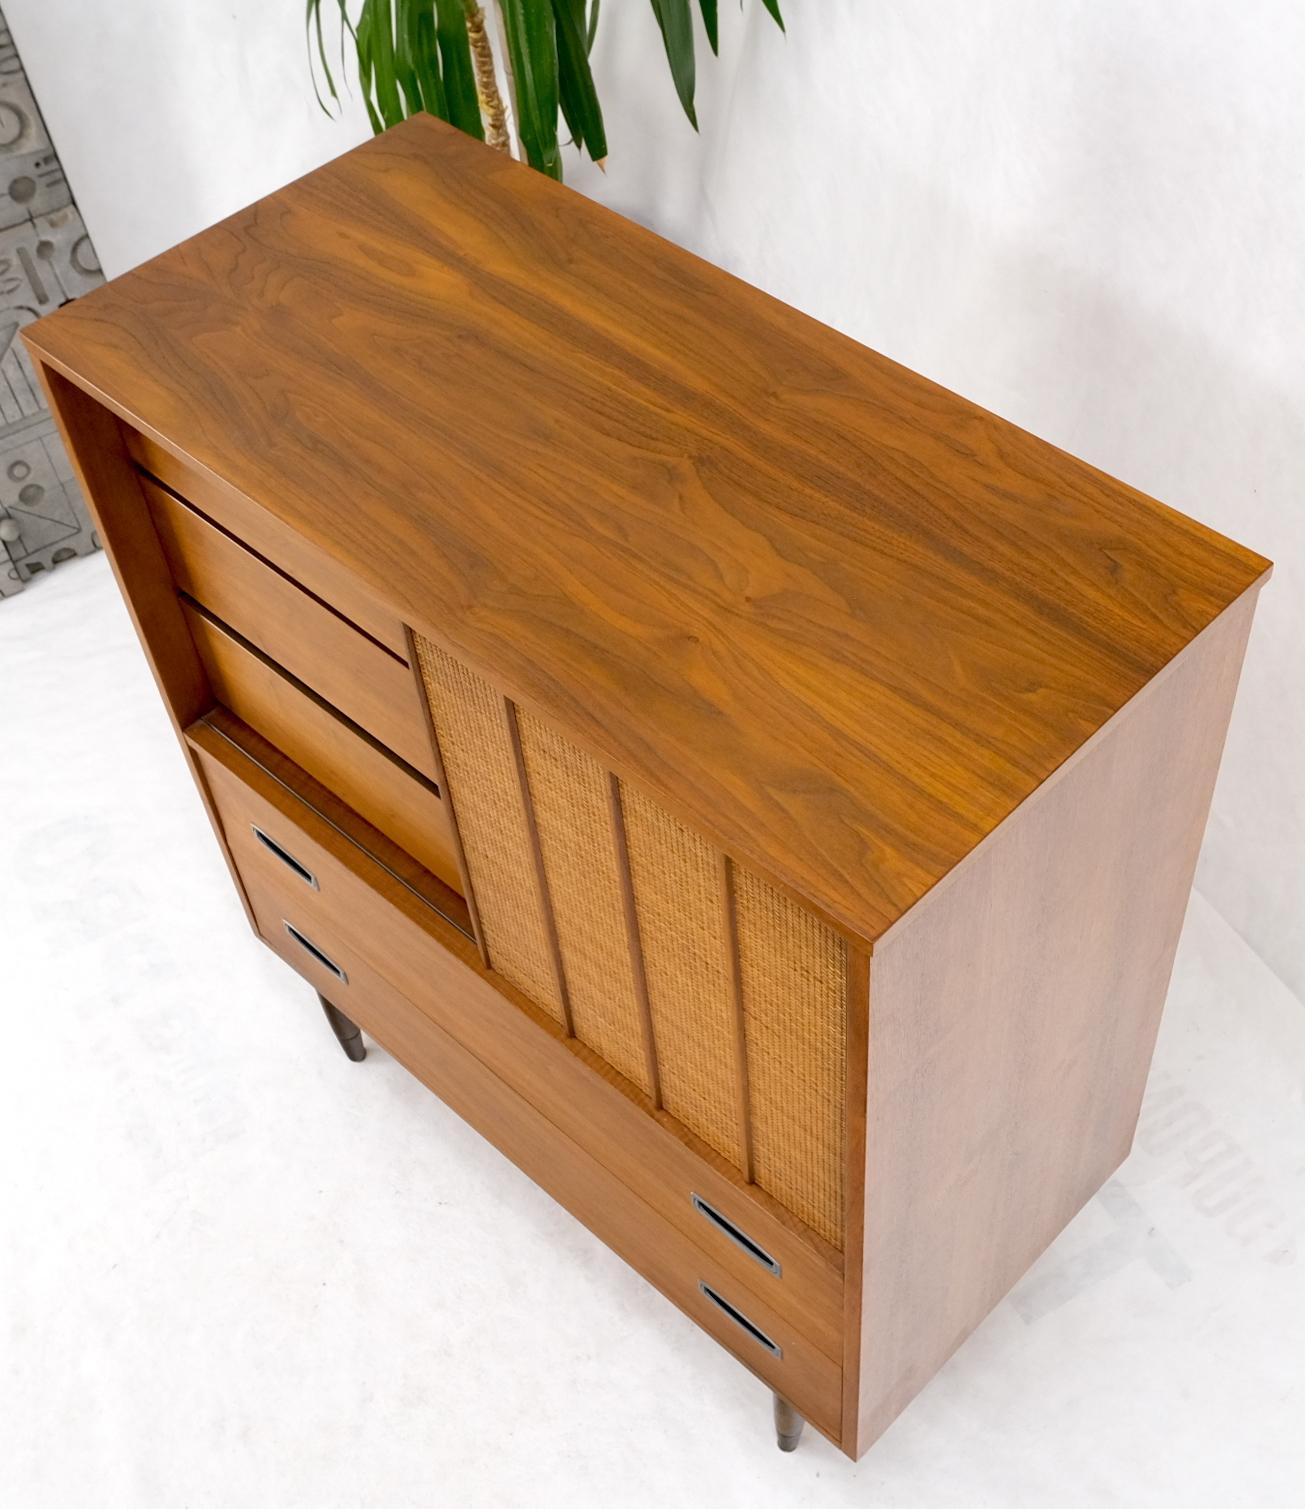 Lacquered Light American Walnut 8 Drawers High Chest Dresser Cane Sliding Door Compartment For Sale